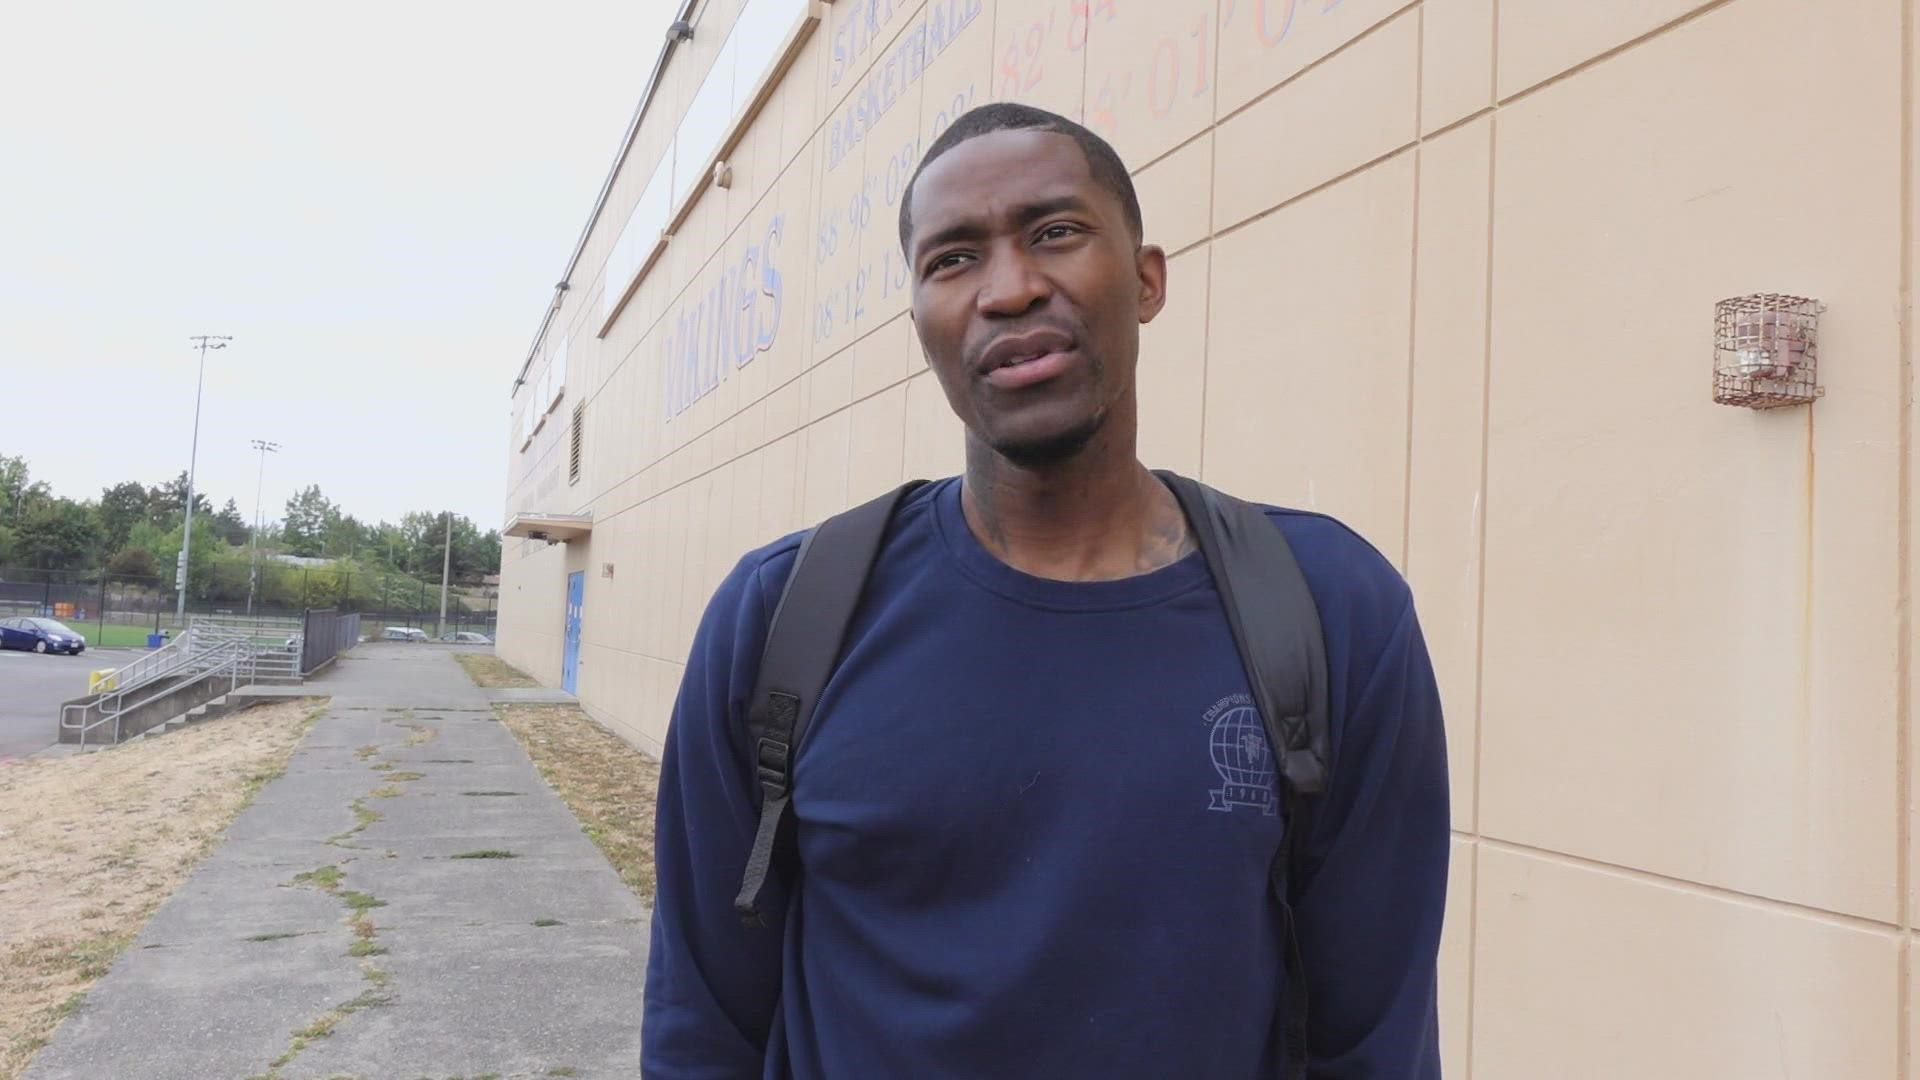 NBA star Jamal Crawford continues to give back to kids in his Seattle neighborhood.